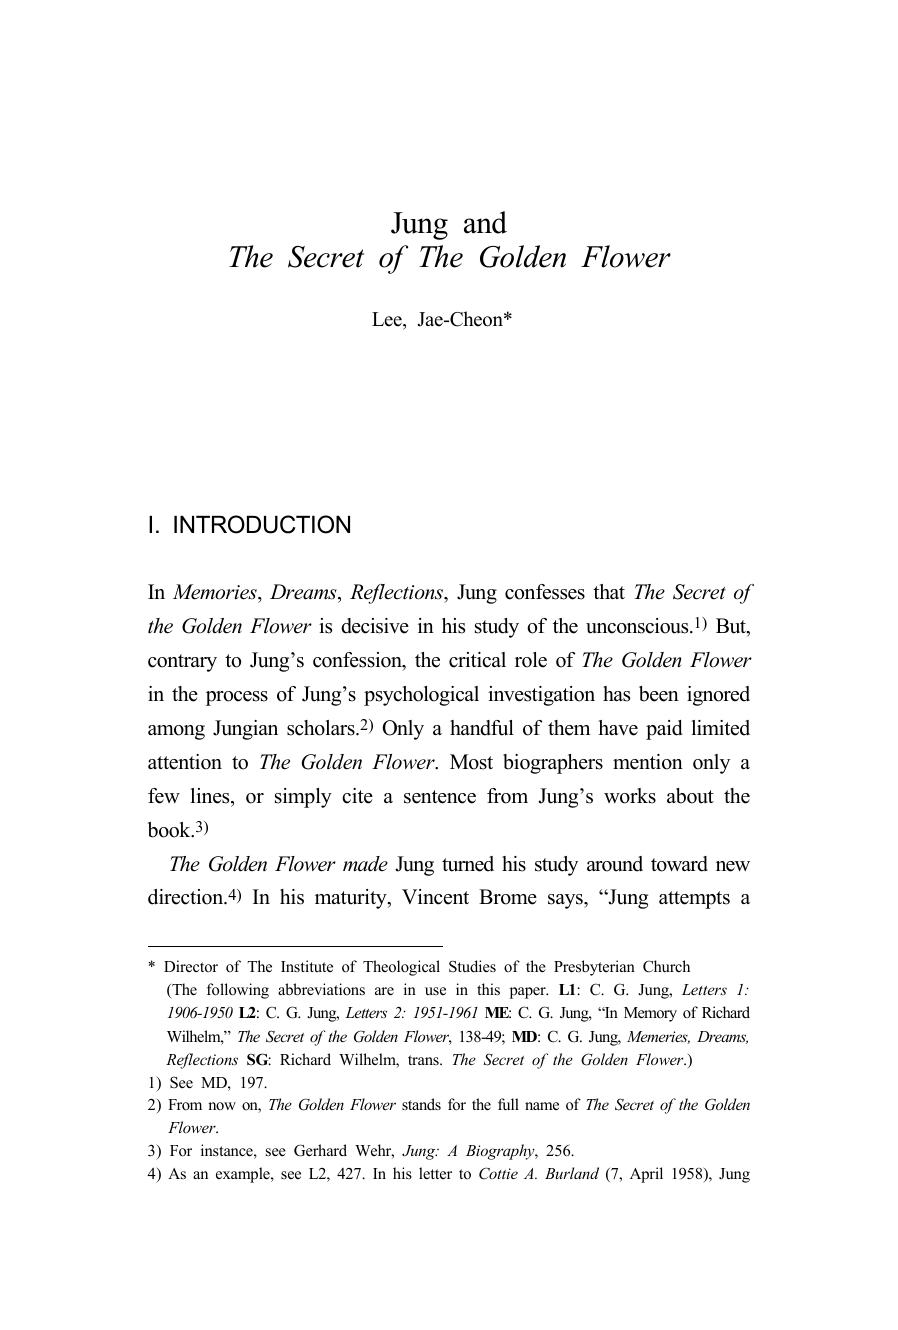 Jung and The Secret of The Golden Flower - Essay